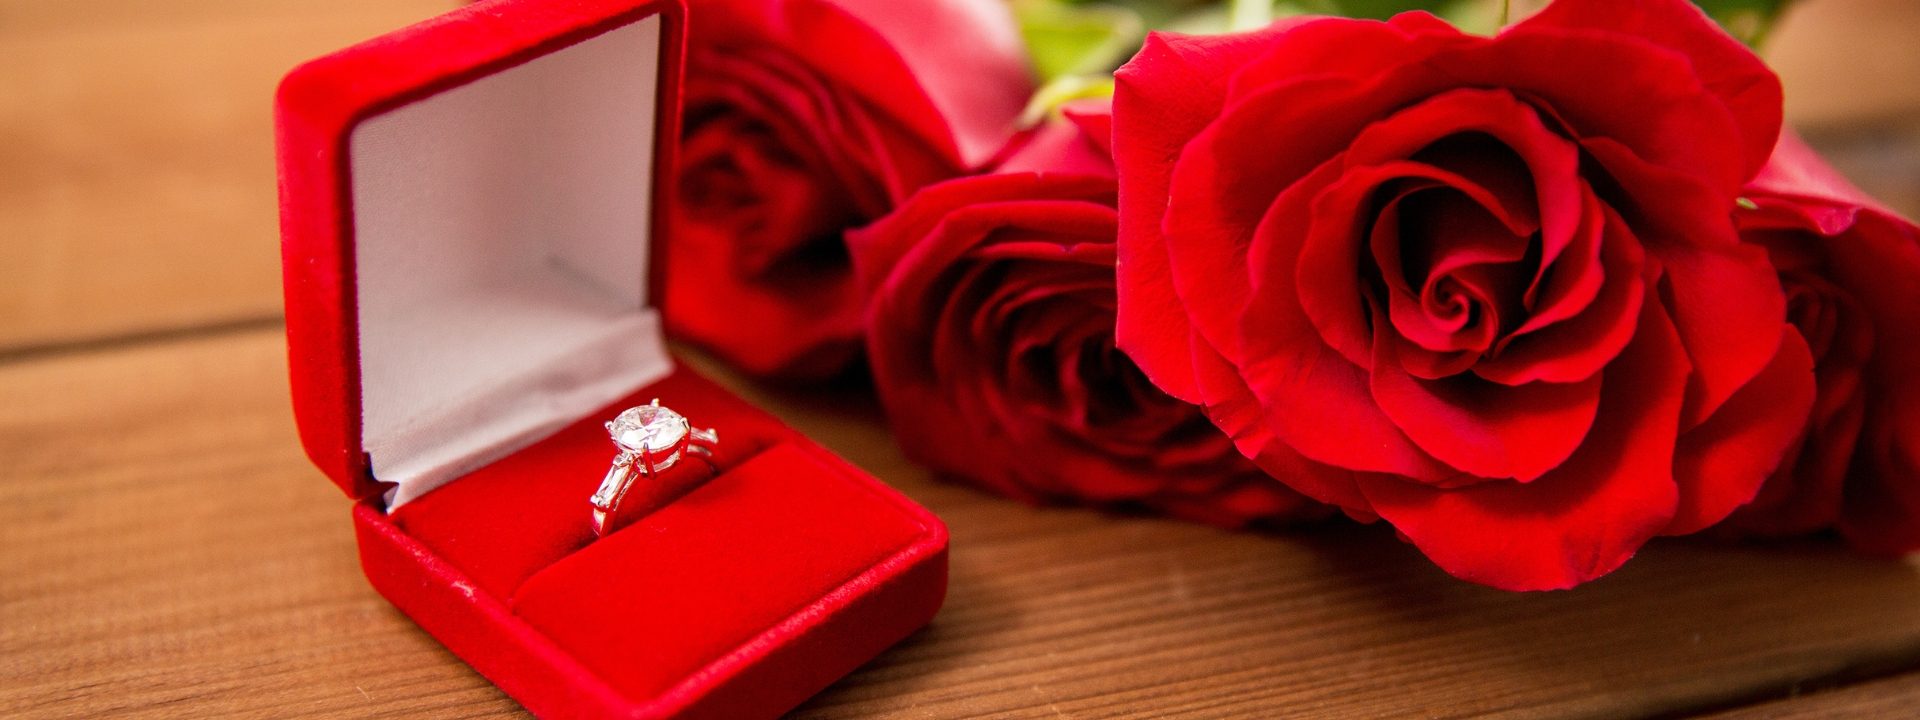 White gold three-stone diamond engagement ring in a red ring box next to red roses.